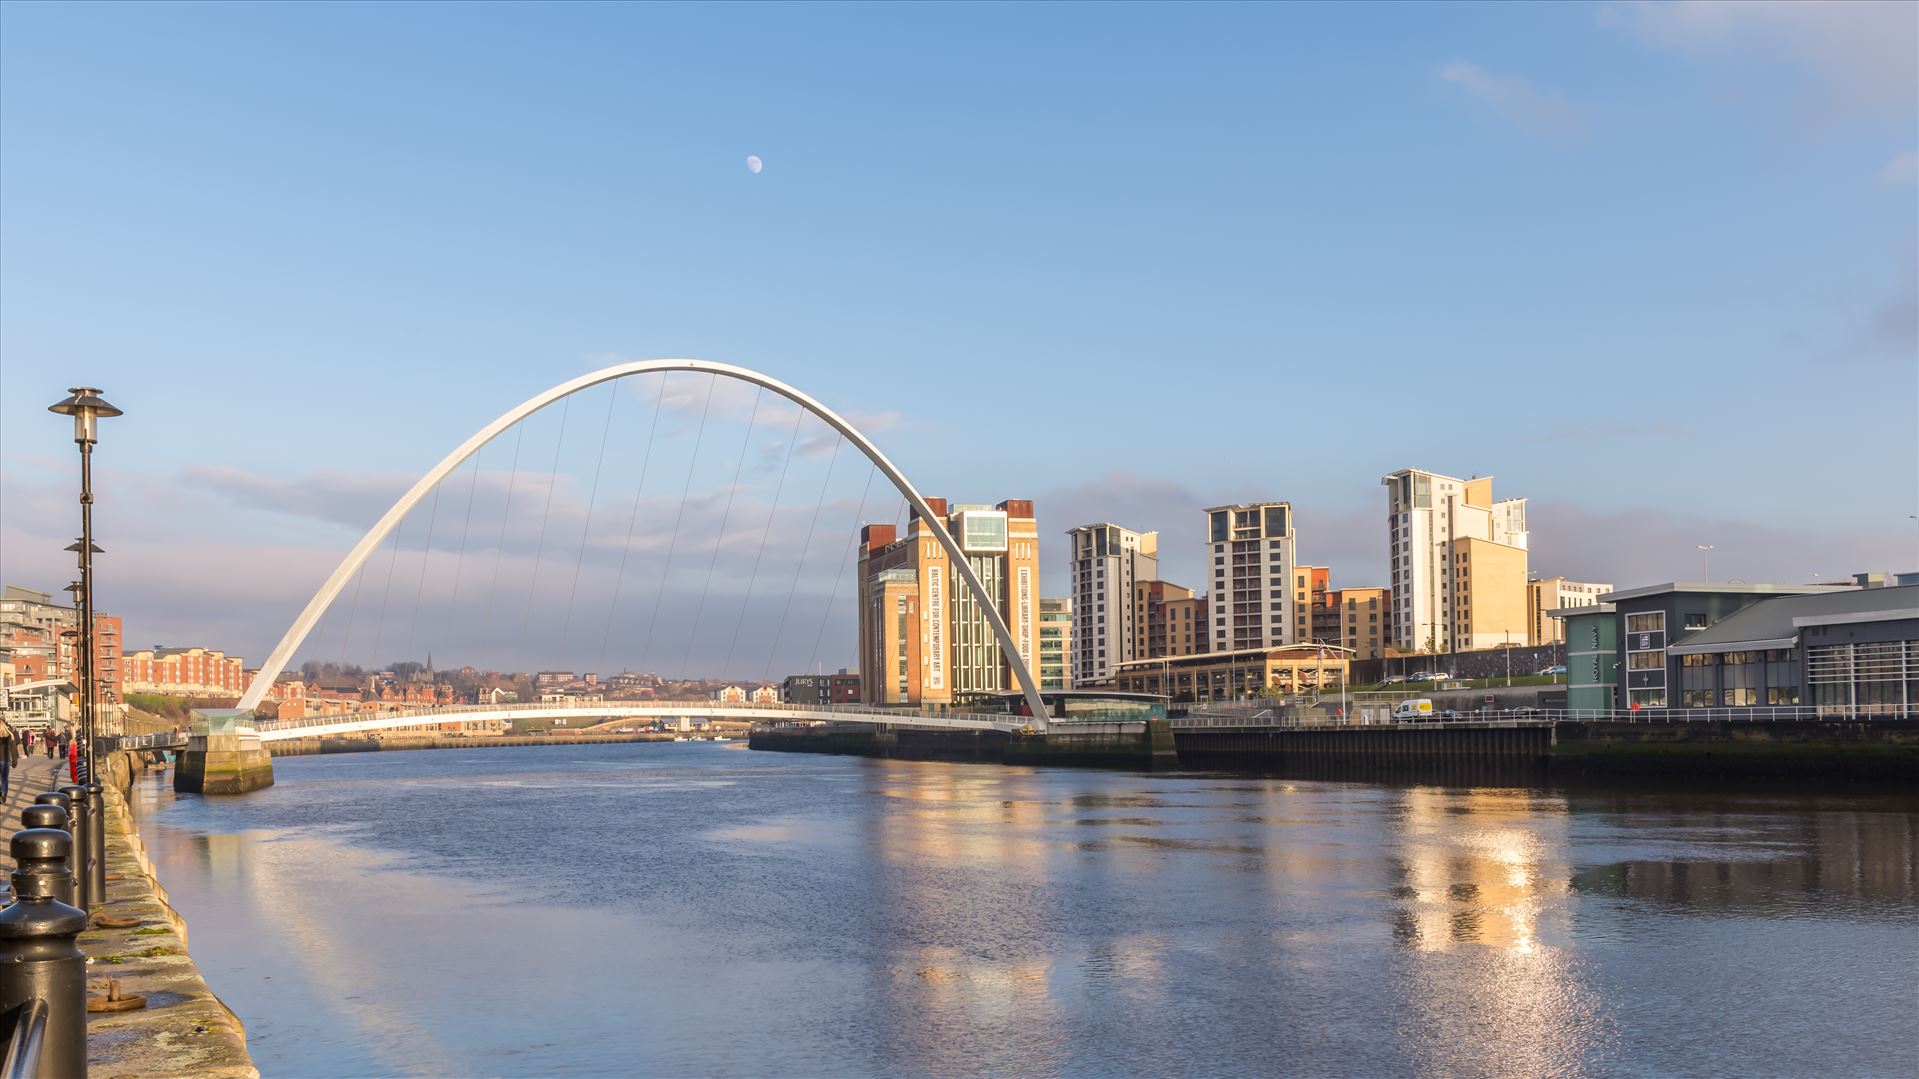 Millennium Bridge & the Baltic centre - The Millennium Bridge was first opened in 2001 & spans the River Tyne between Newcastle & Gateshead. by philreay